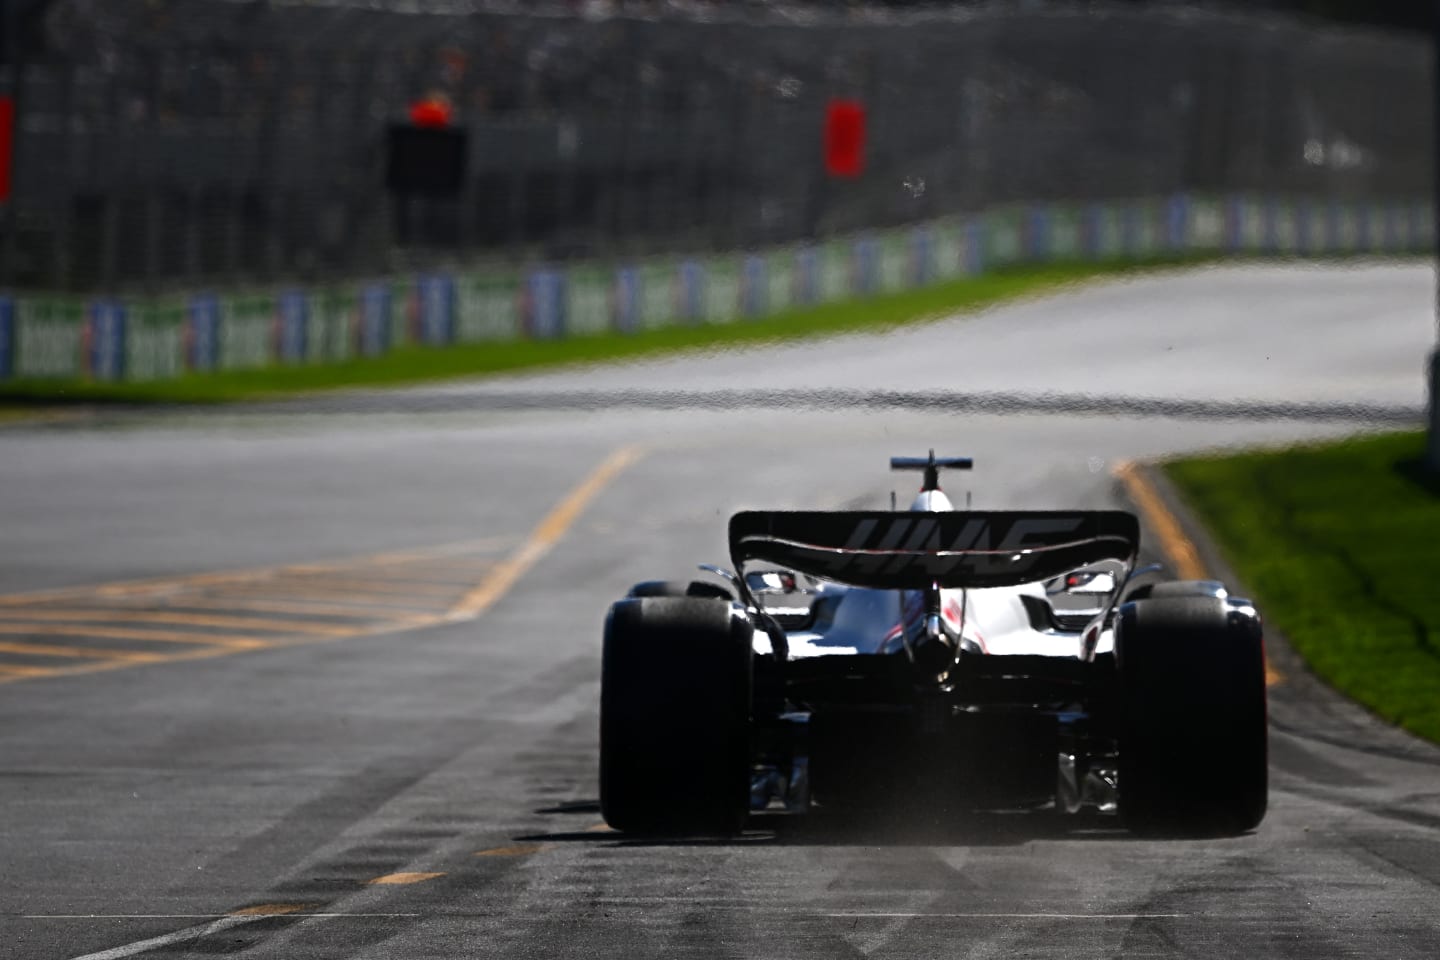 MELBOURNE, AUSTRALIA - APRIL 08: Kevin Magnussen of Denmark driving the (20) Haas F1 VF-22 Ferrari on track during practice ahead of the F1 Grand Prix of Australia at Melbourne Grand Prix Circuit on April 08, 2022 in Melbourne, Australia. (Photo by Clive Mason/Getty Images)